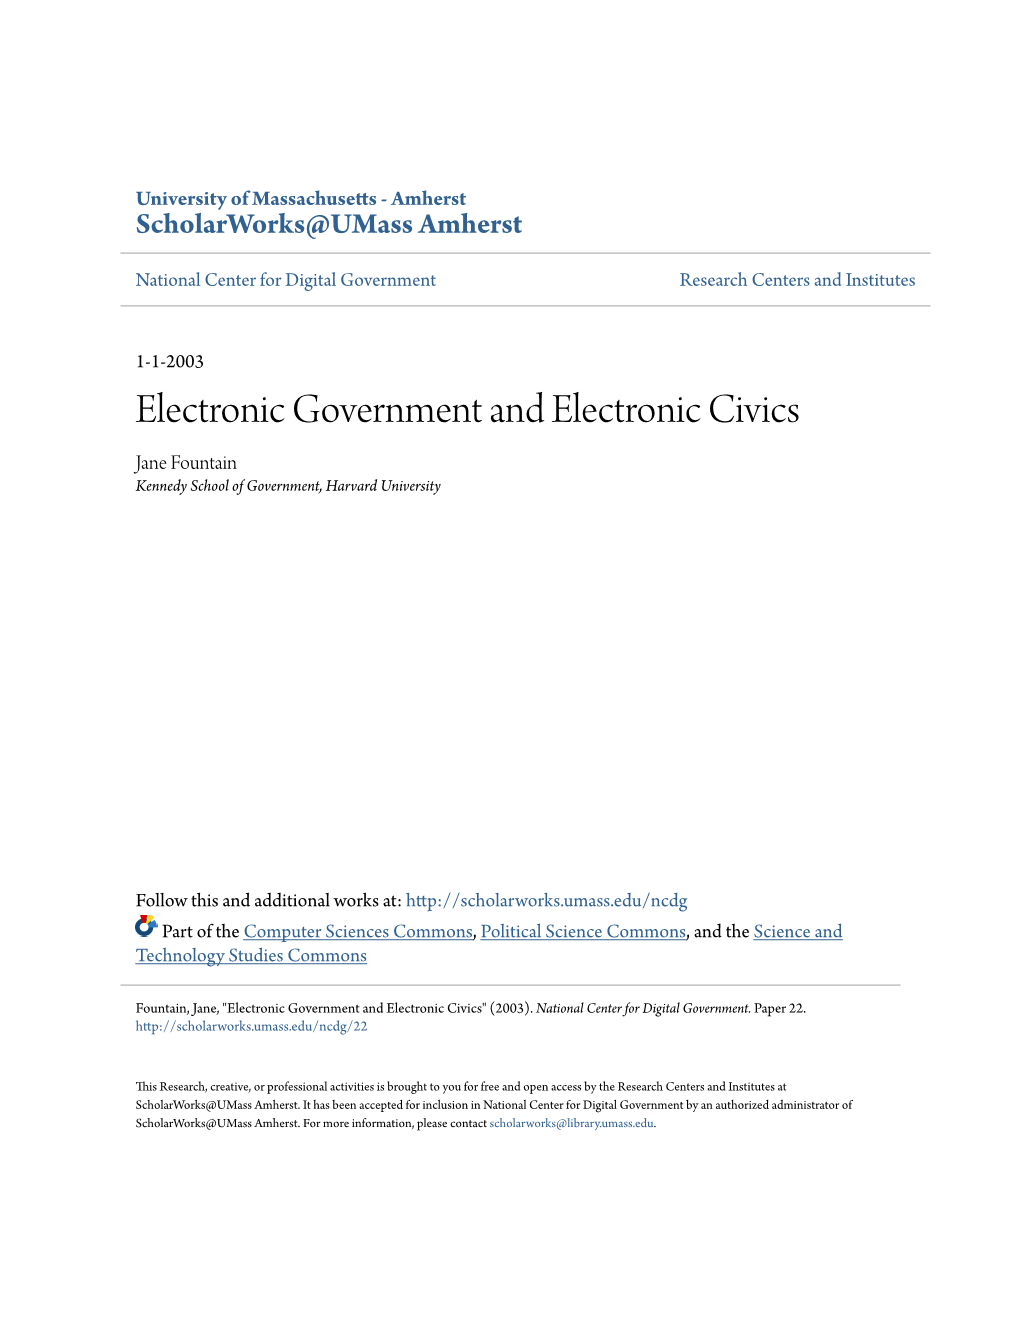 Electronic Government and Electronic Civics.Pdf